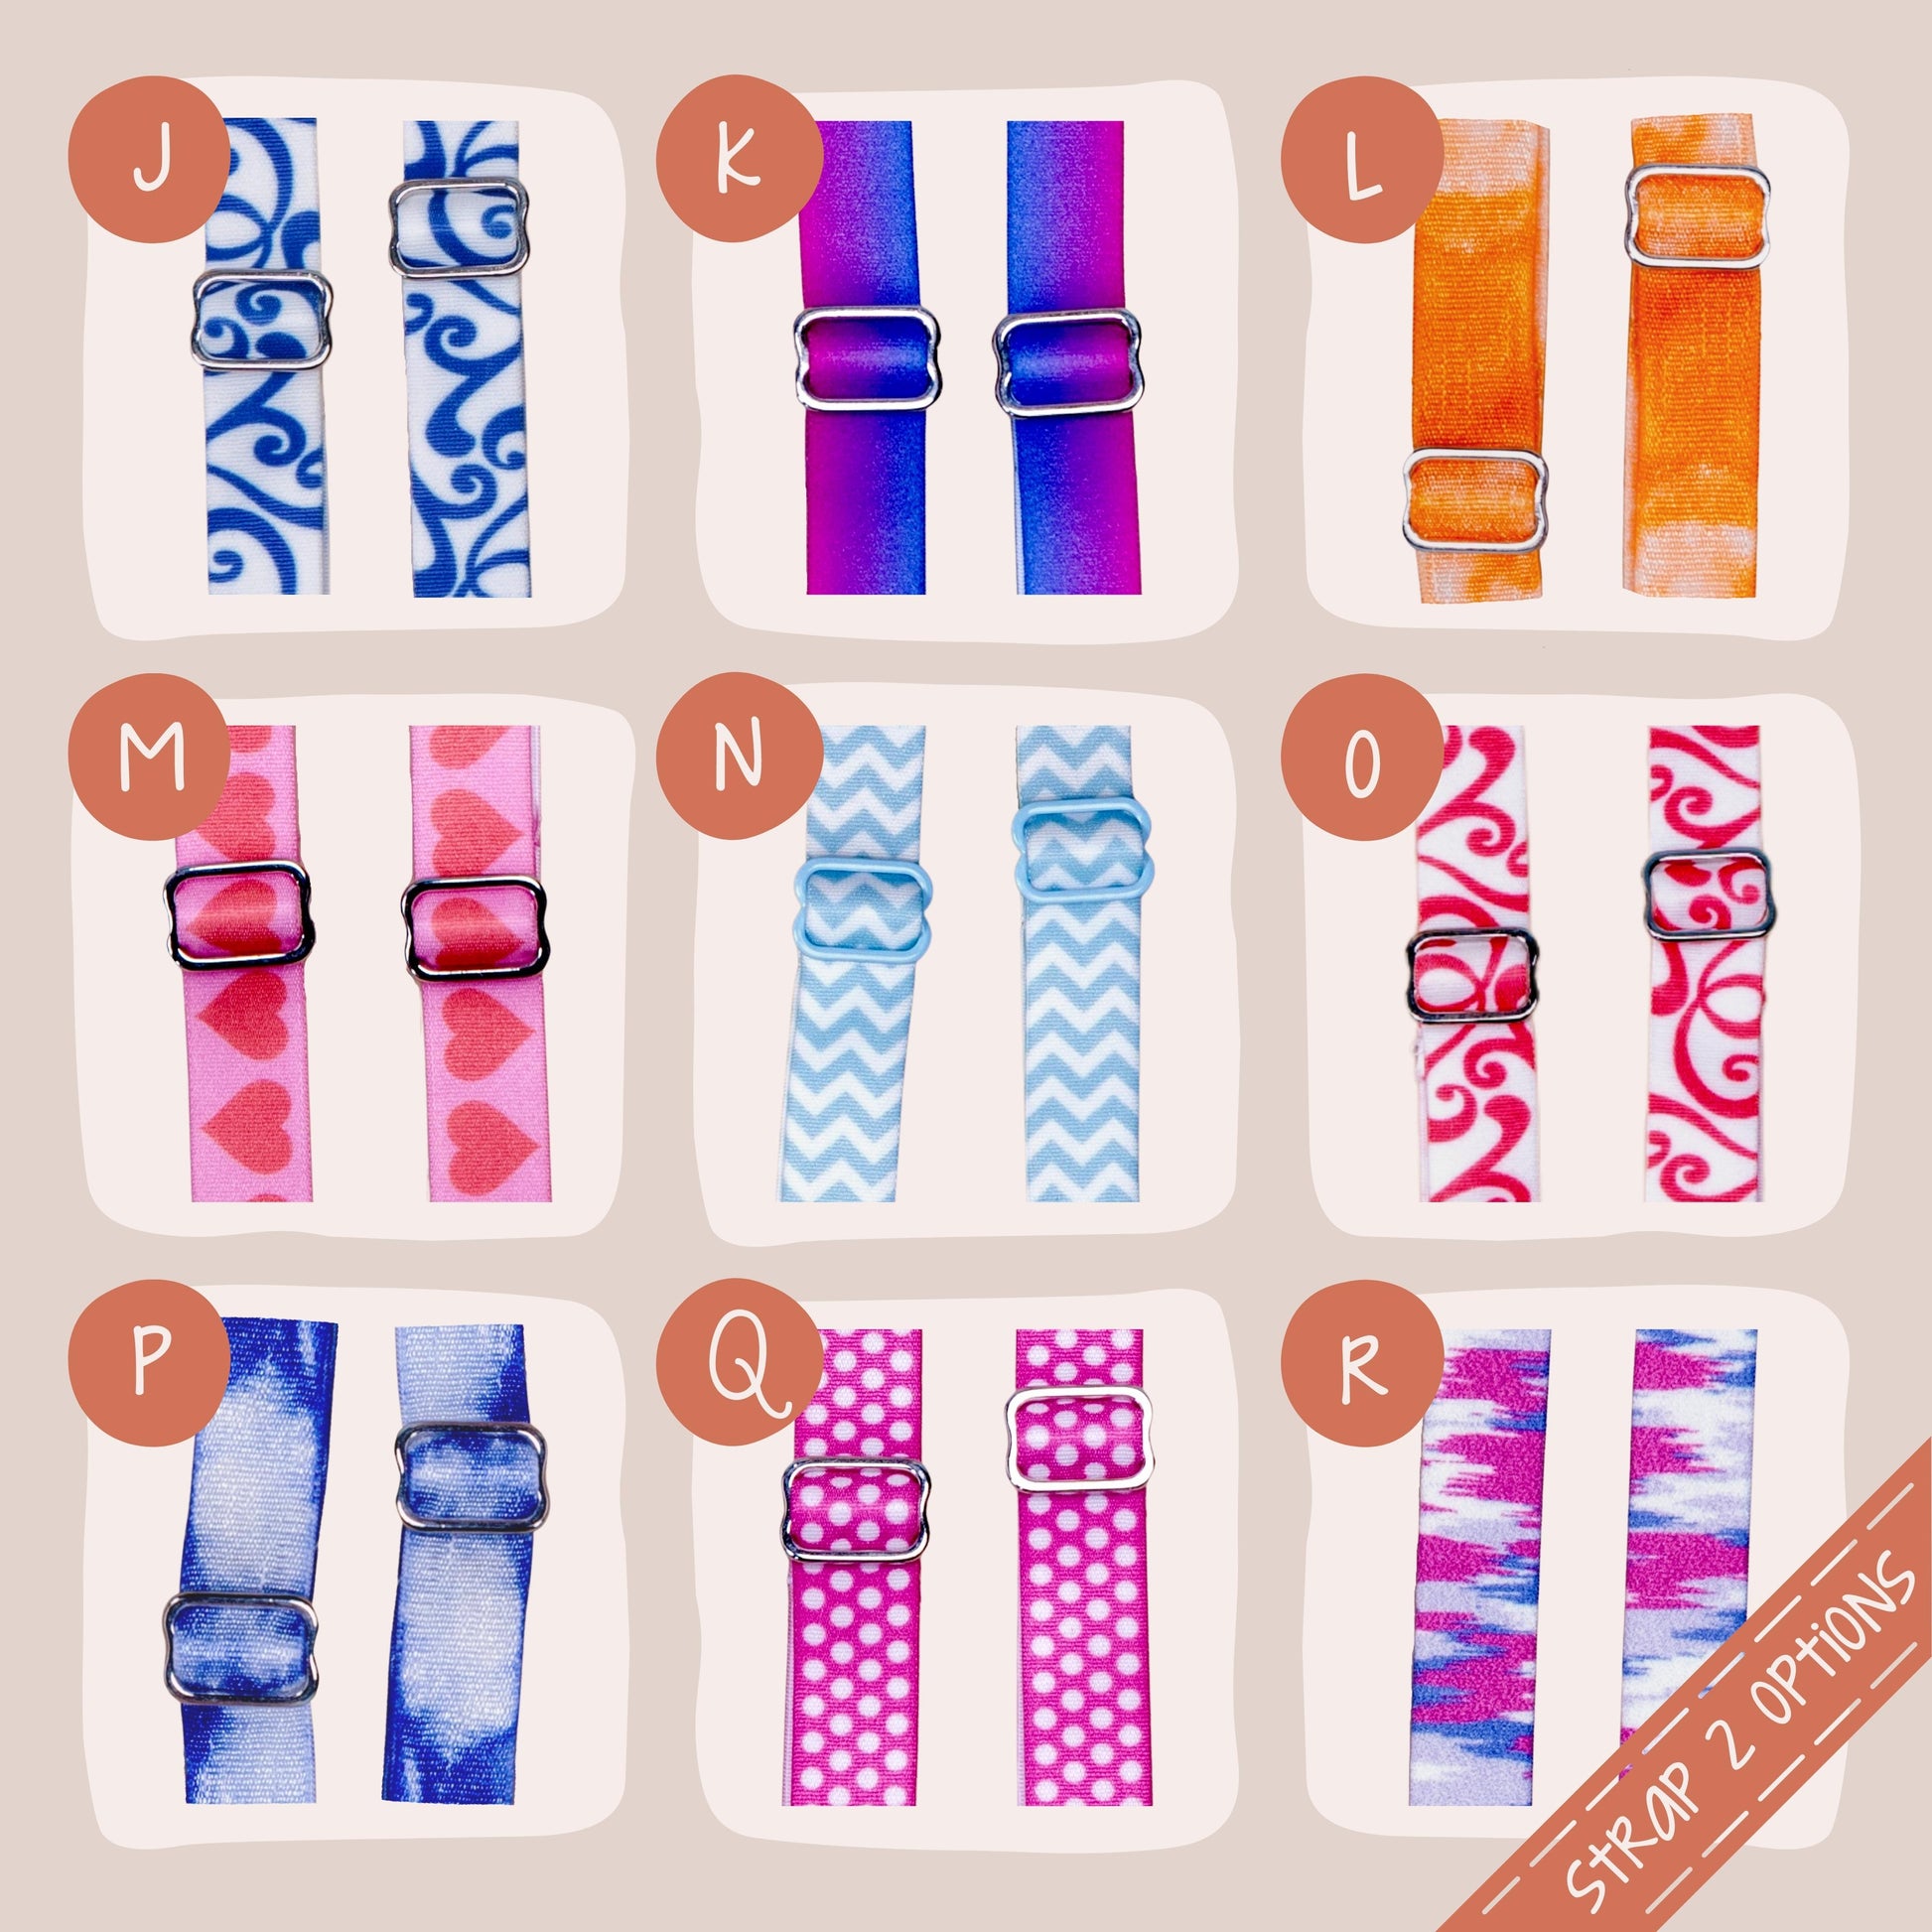 Grid of Strap 2 Options (from left to right, top to bottom): (j) Rollin' Blue, (k) Galaxy Ombre, (L) Clementine Tie-Dye, (m) Sweet Heart, (n) Baby Blue Chevron, (o) Rockin' Red, (p) Blueberry Tie-Dye, (Q) Strawberry Polka, (r) 3-D Static.